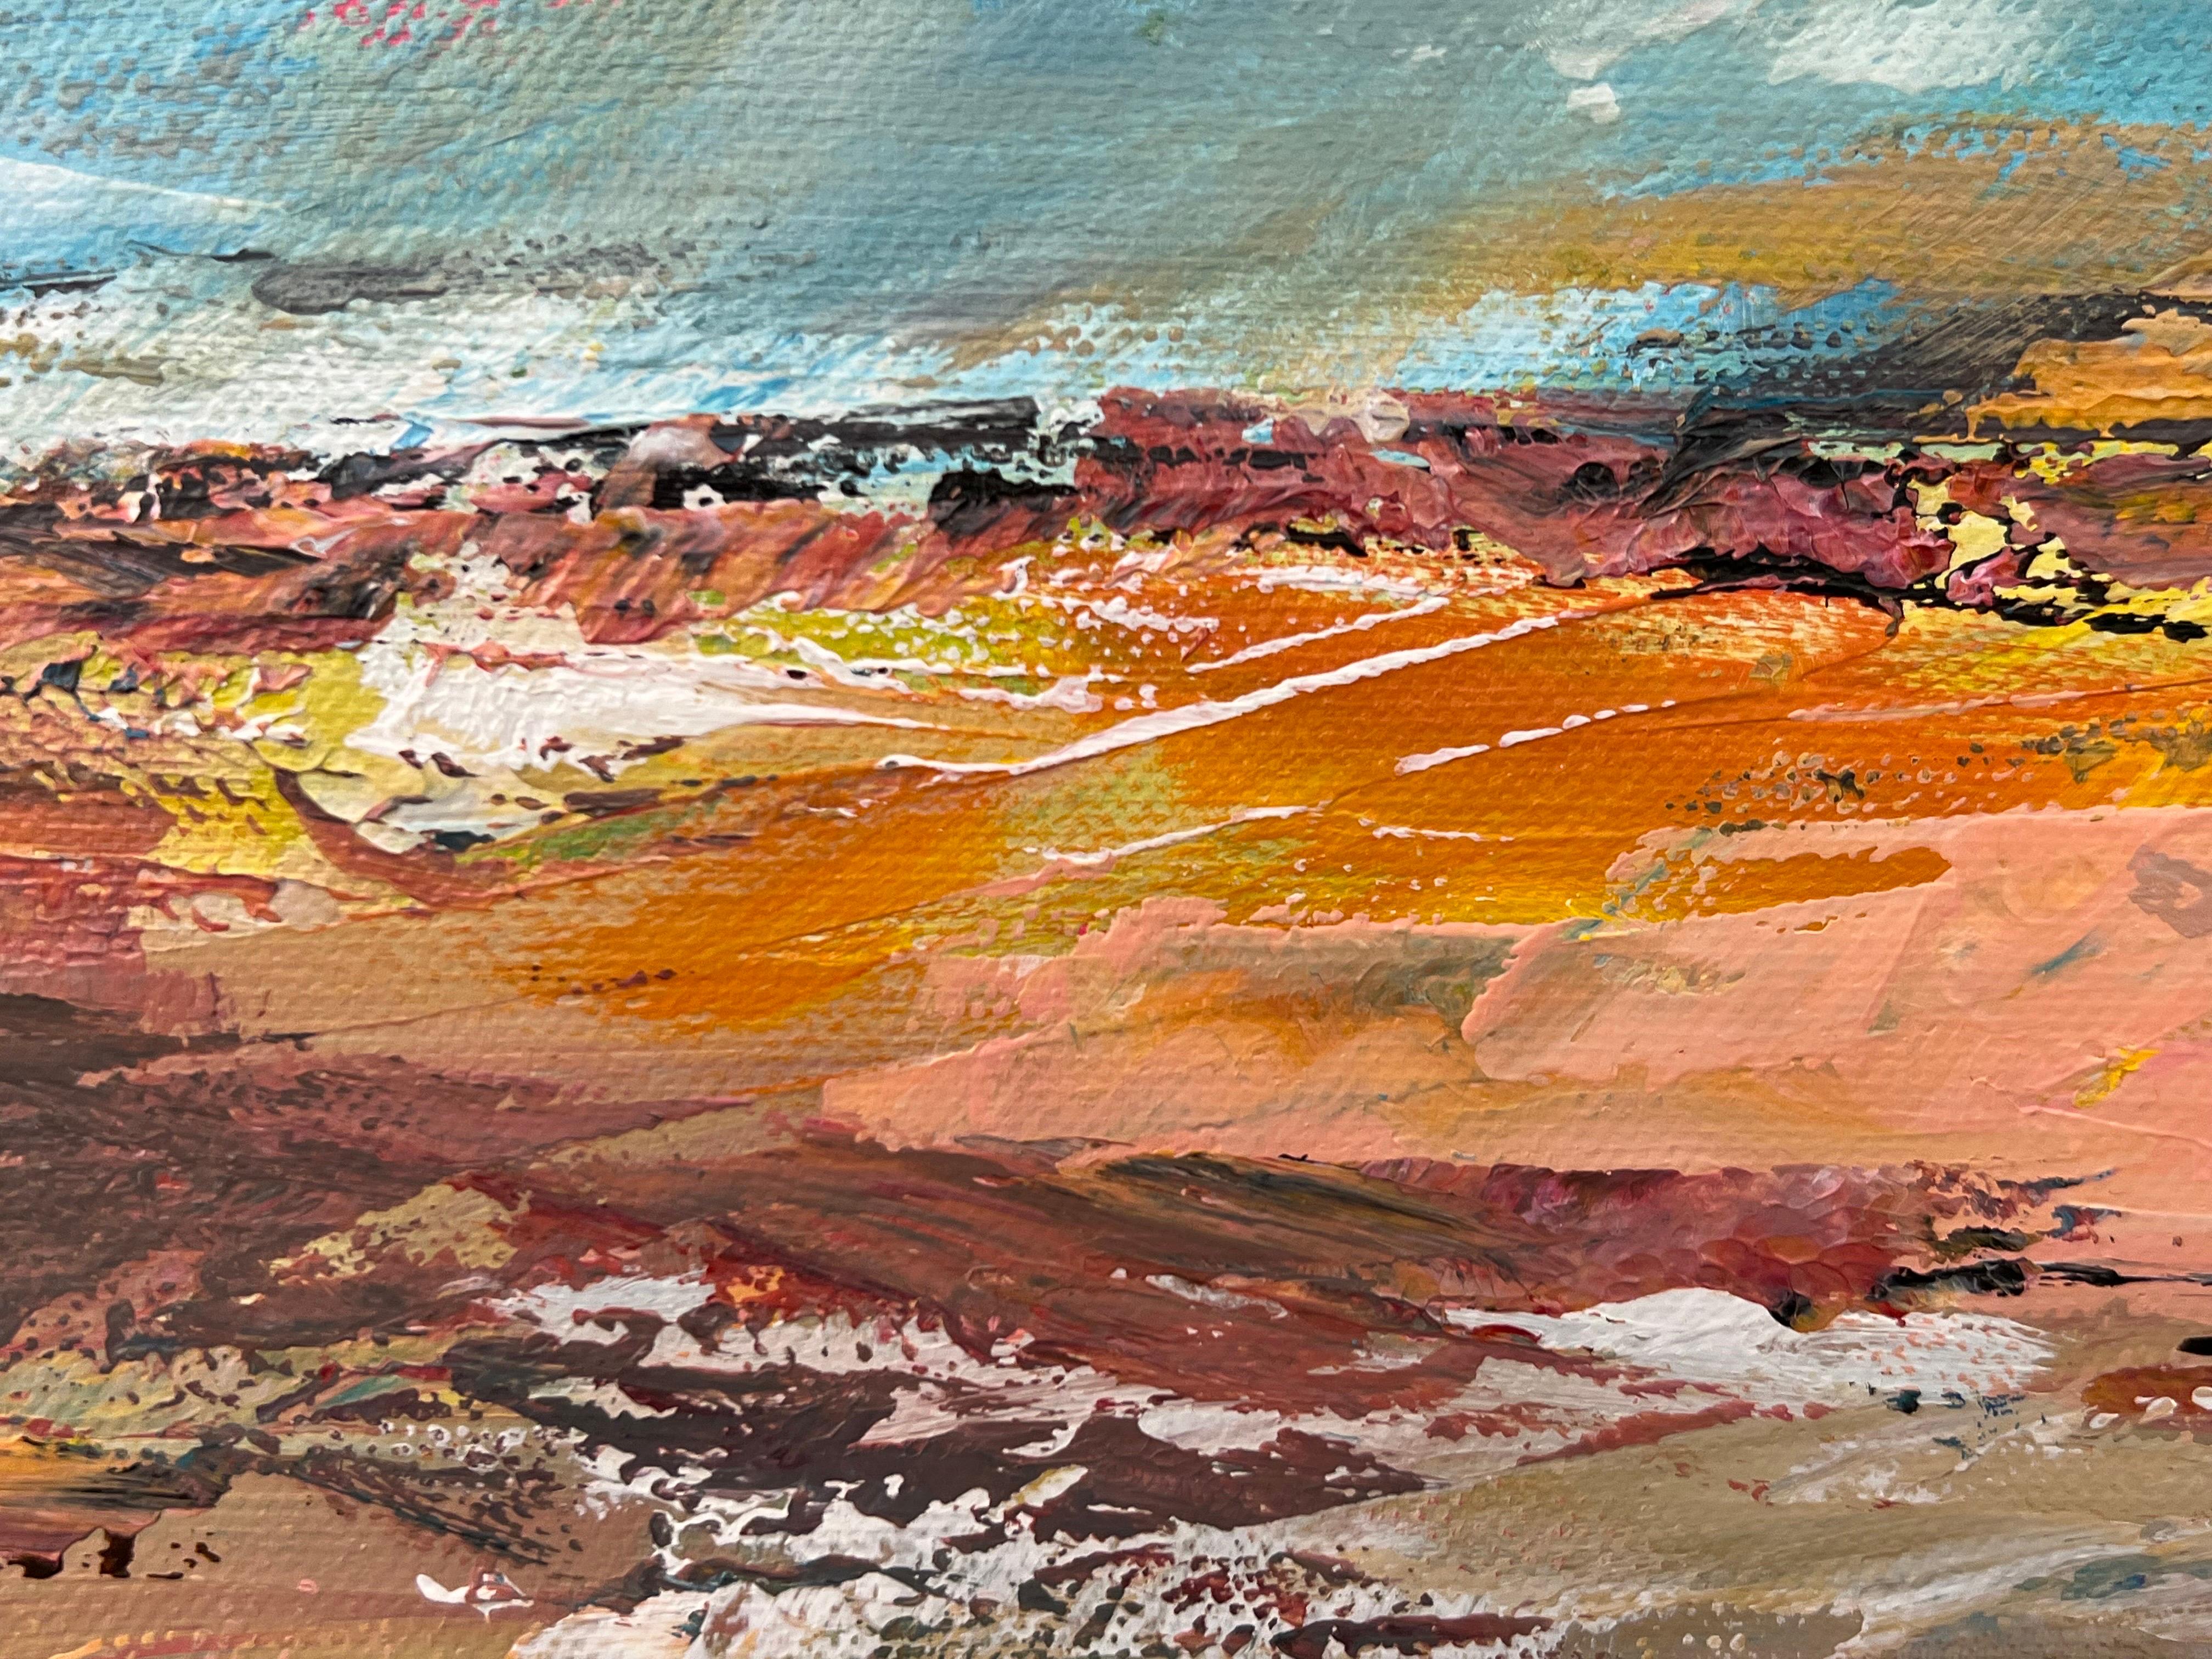 Expressive Abstract Seascape Landscape Painting by Contemporary British Artist For Sale 13